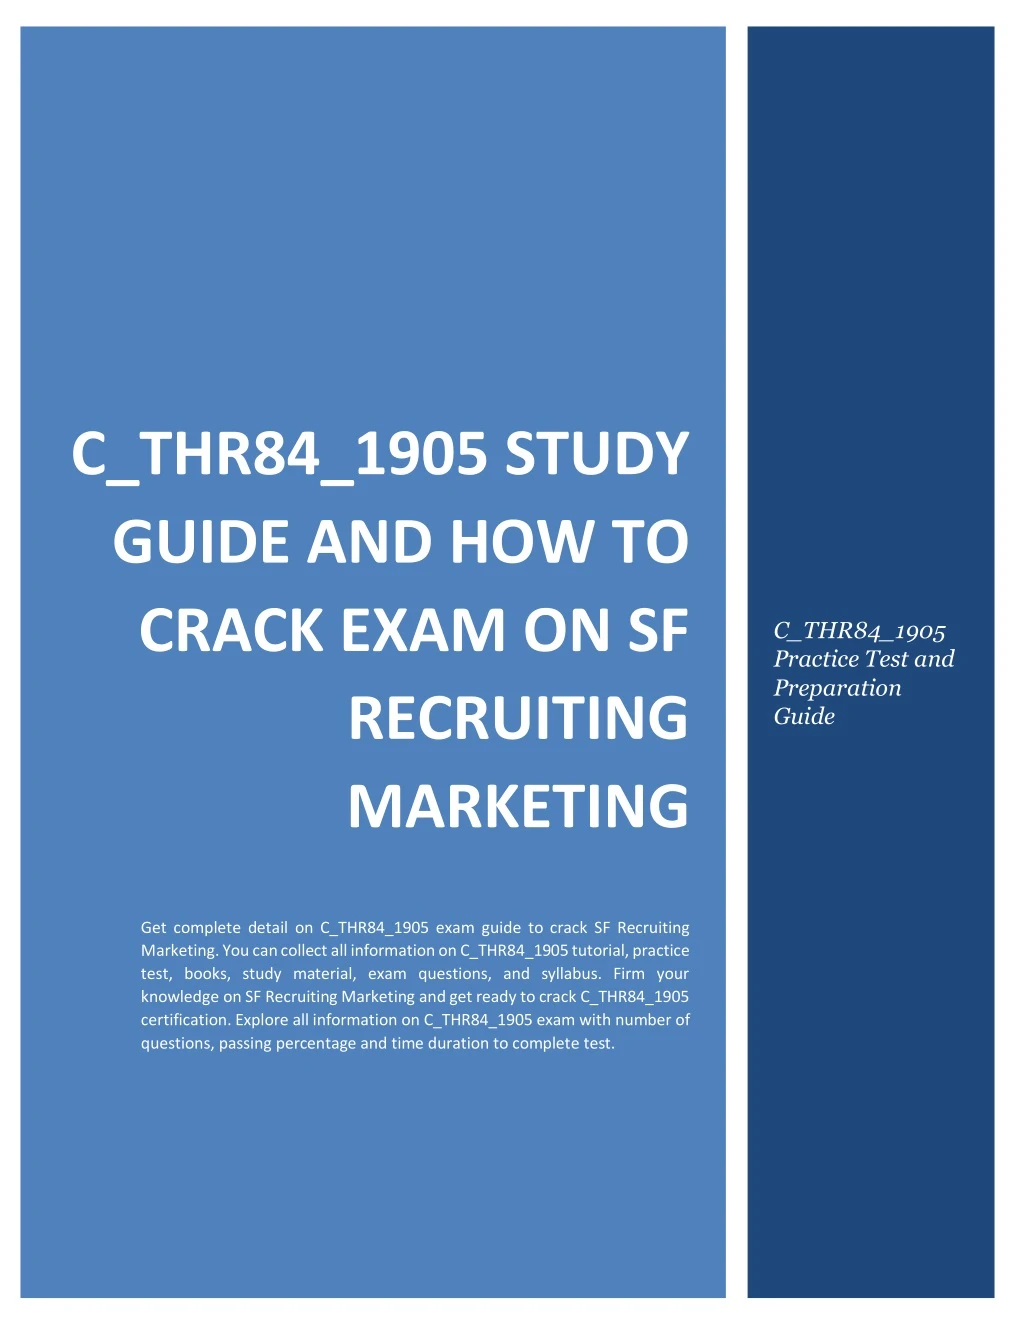 c thr84 1905 study guide and how to crack exam